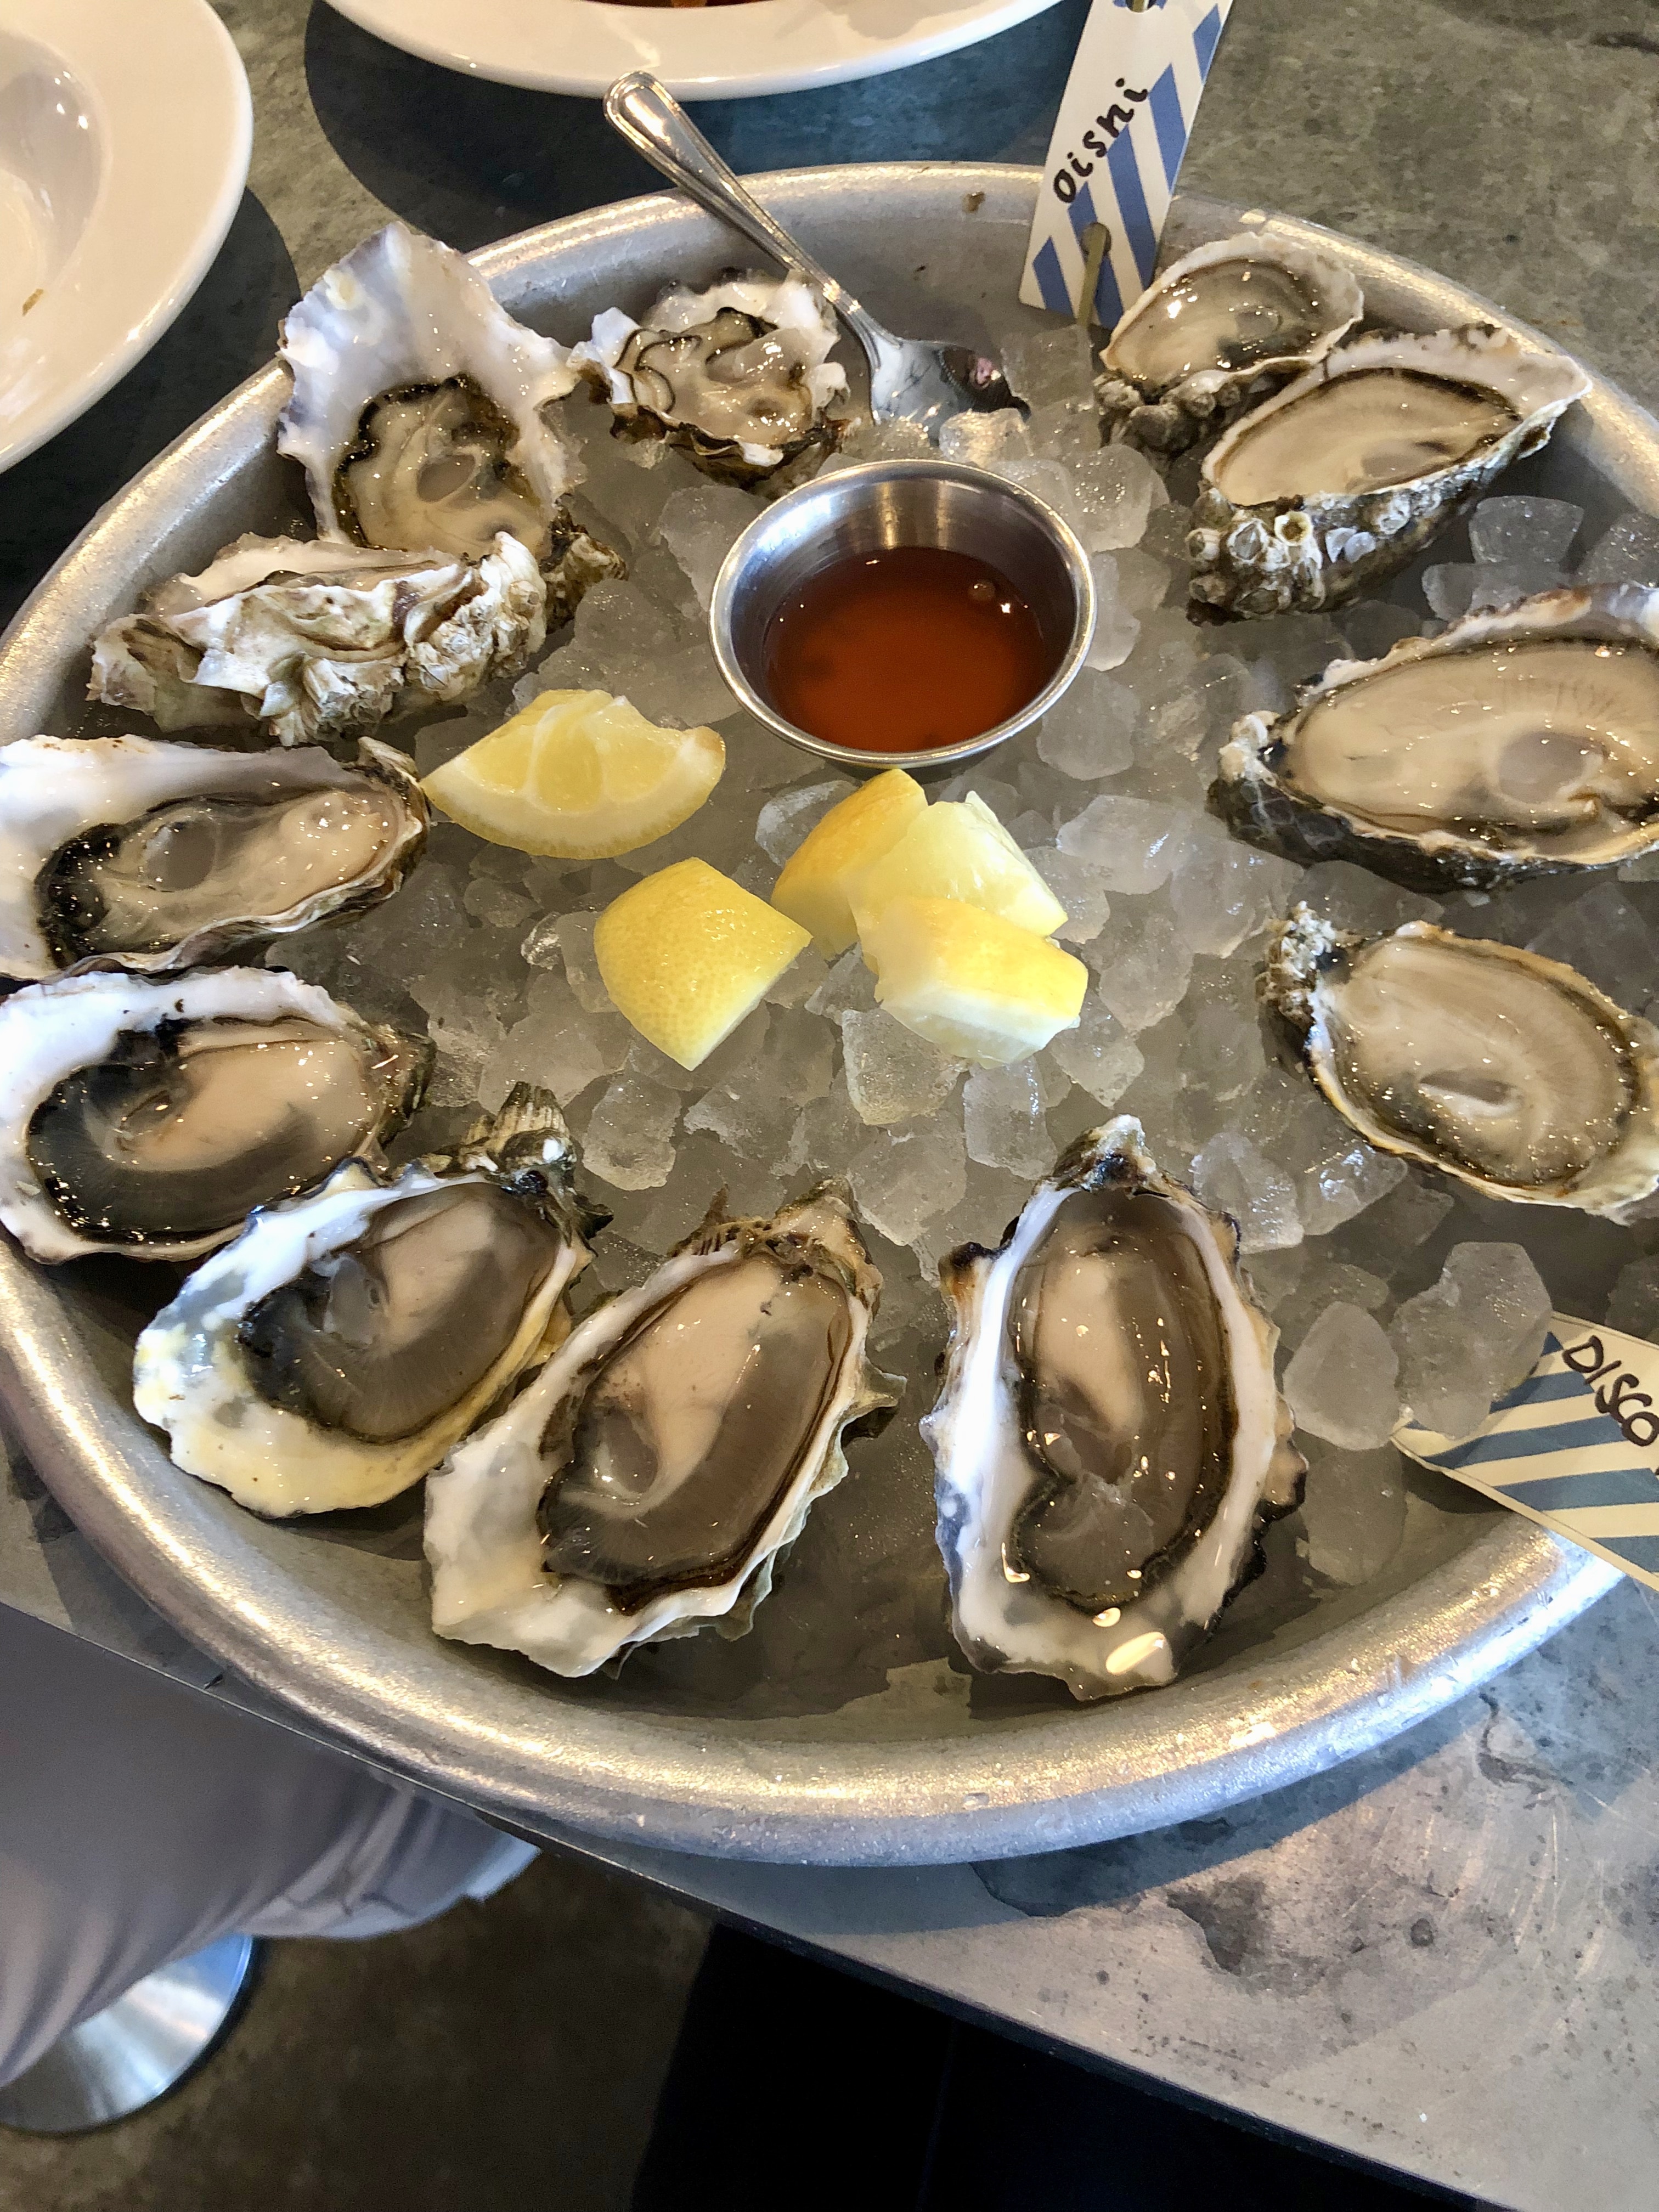 More Oysters